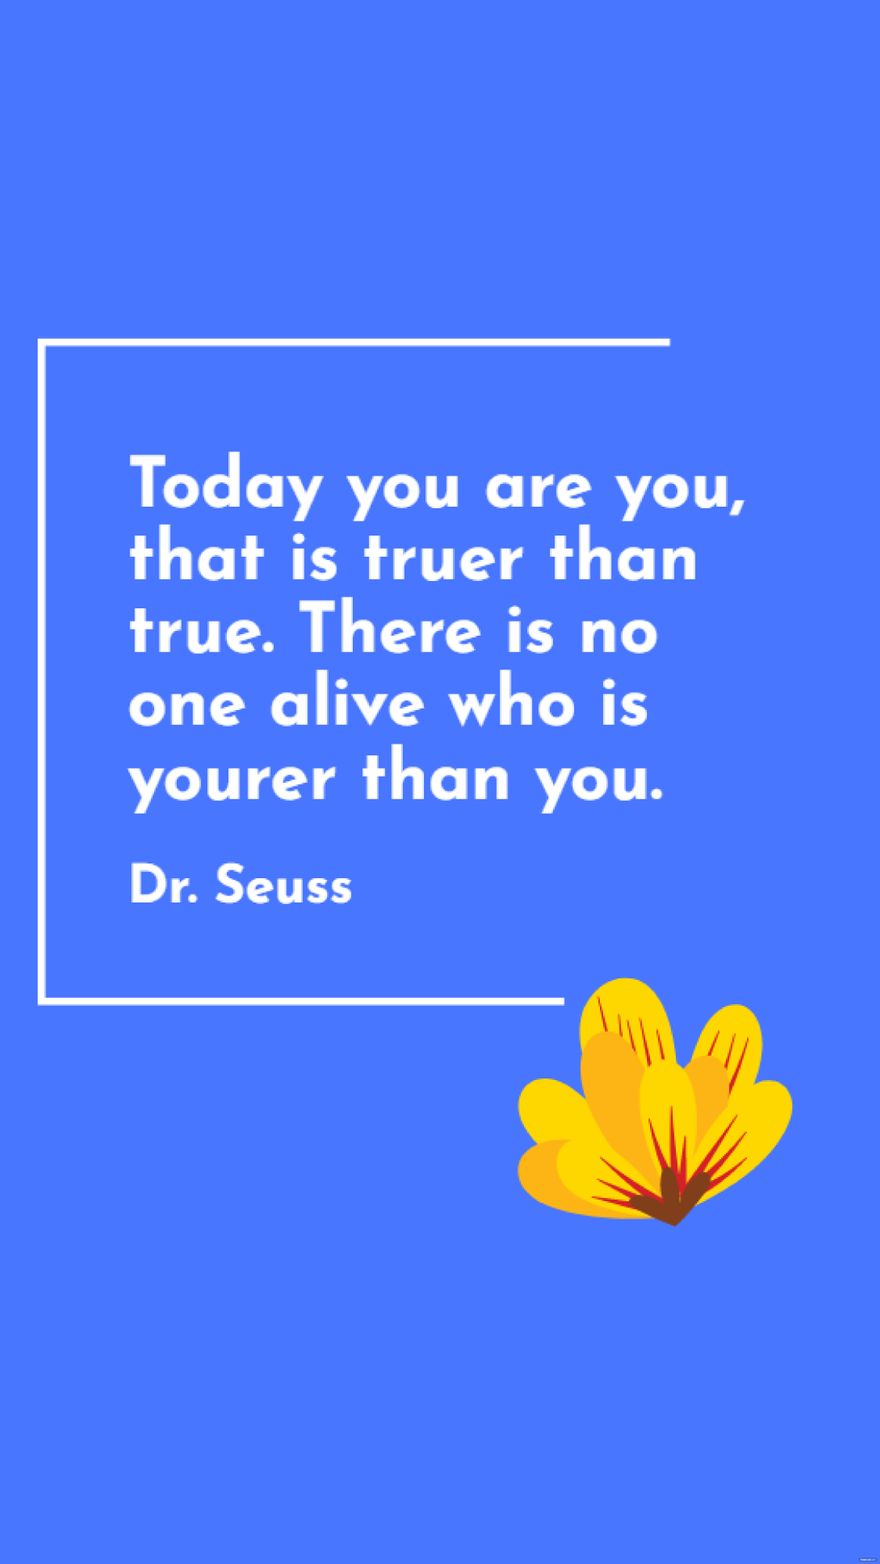 Dr. Seuss - Today you are you, that is truer than true. There is no one alive who is yourer than you.